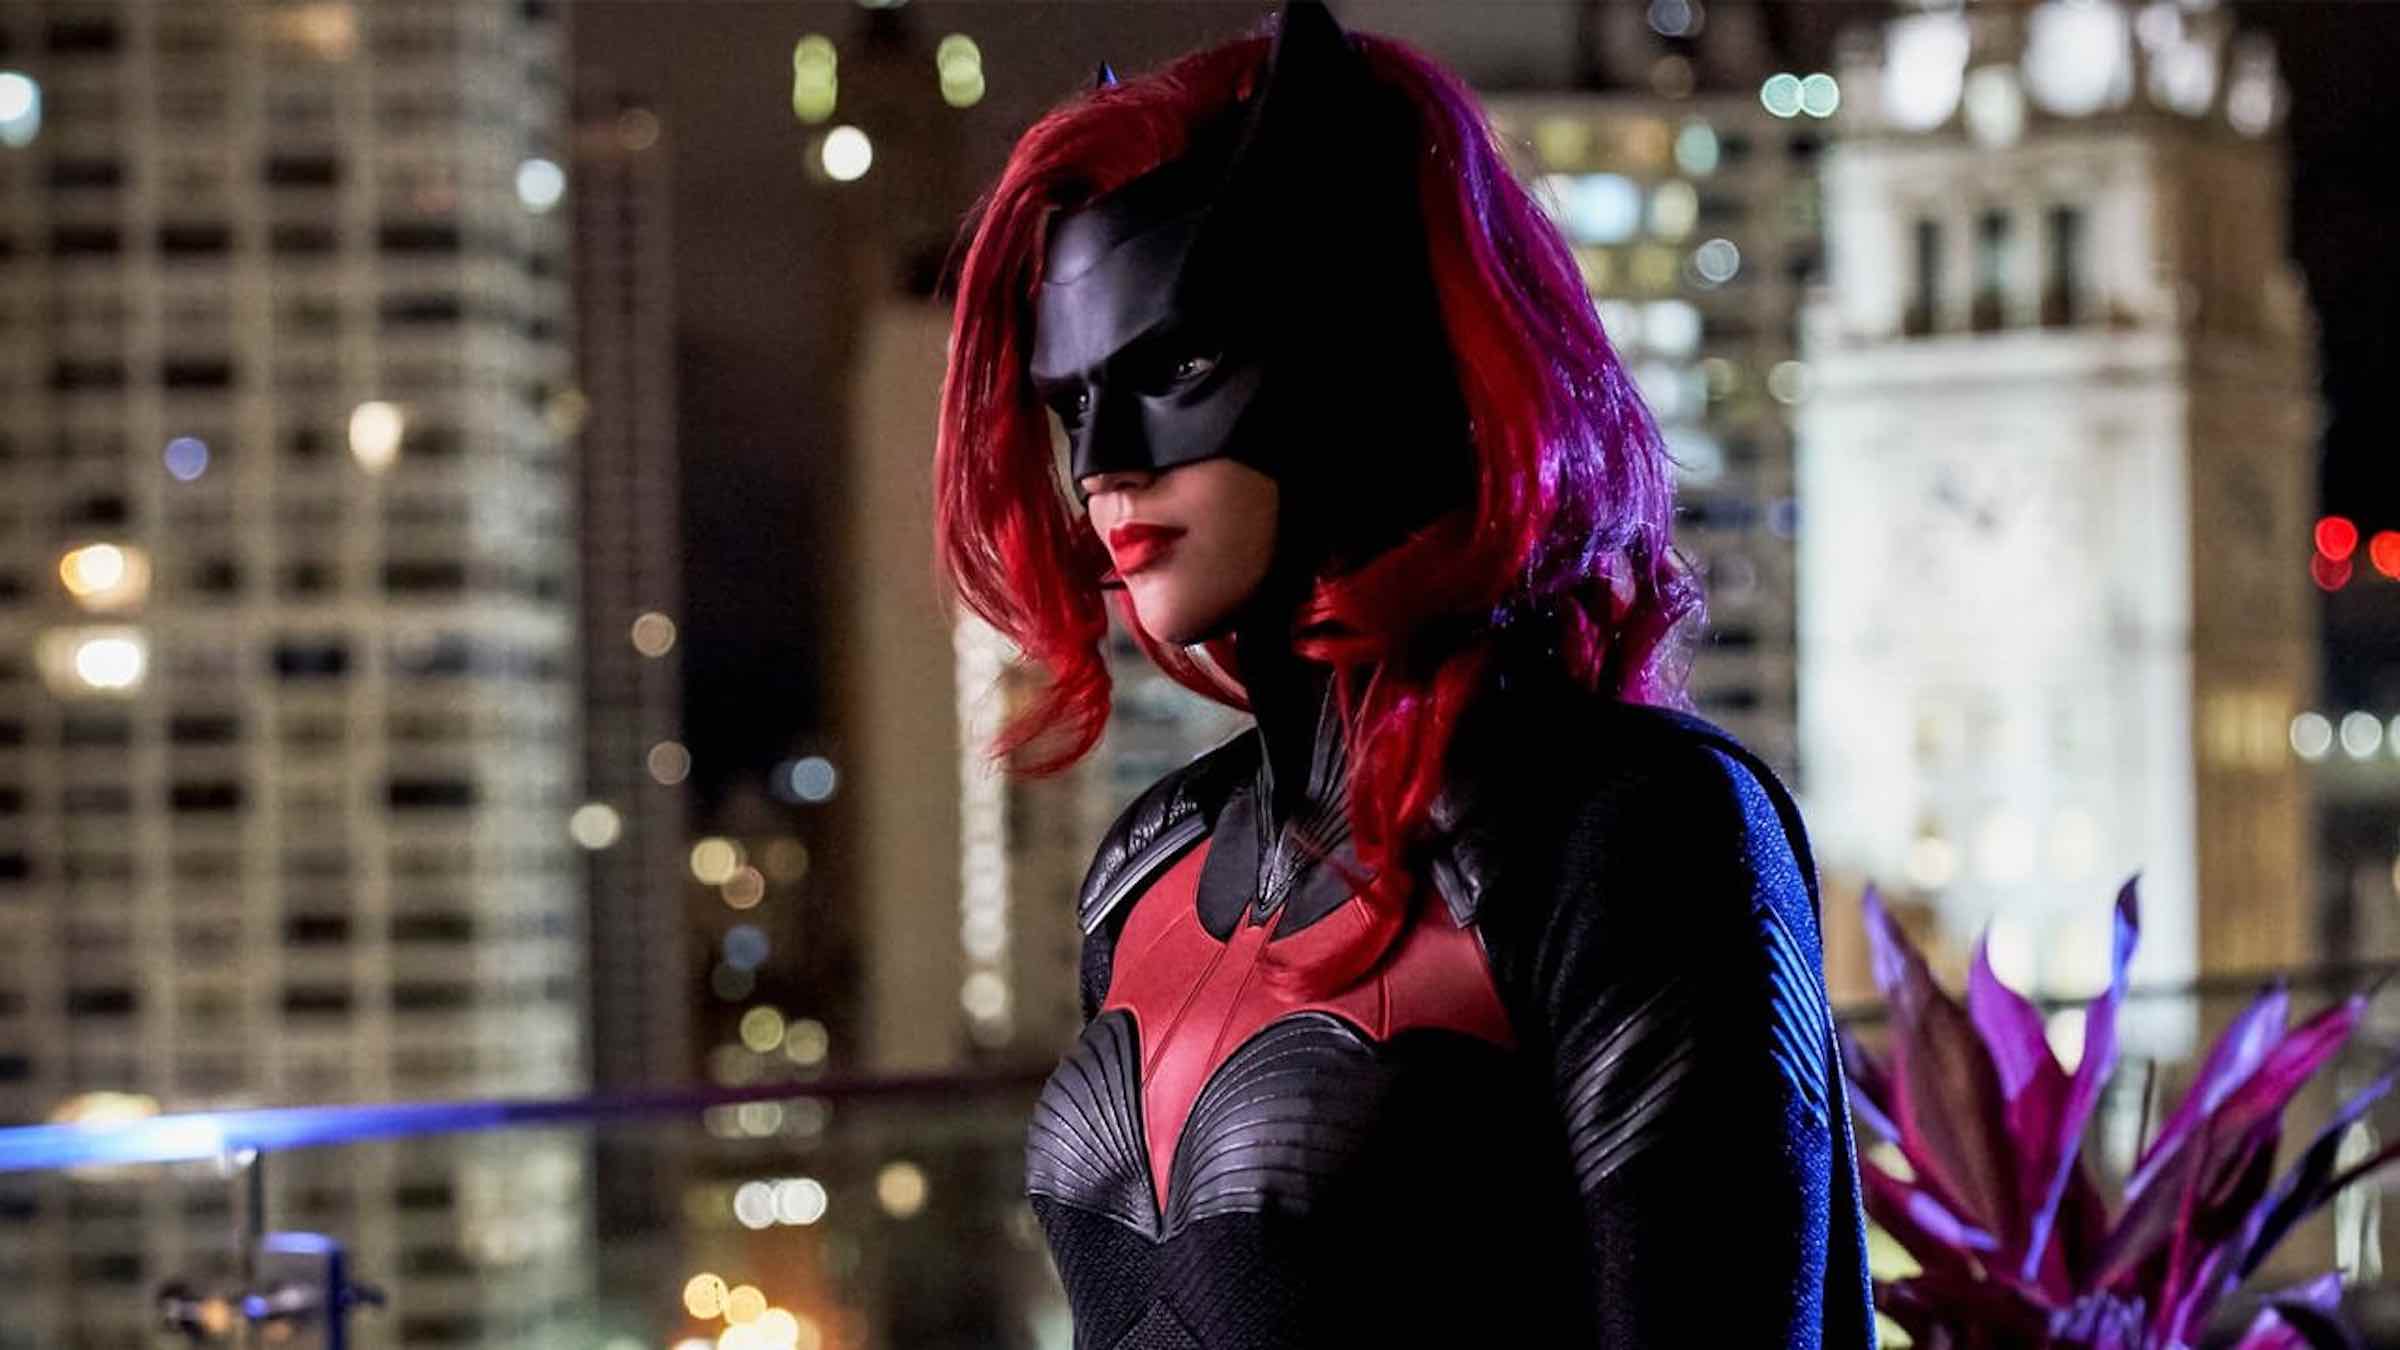 'Batwoman' has been stylish, and the chemistry between Skarsten & Rose is electric. We wonder when Kate is going to wear that bright red wig, though.